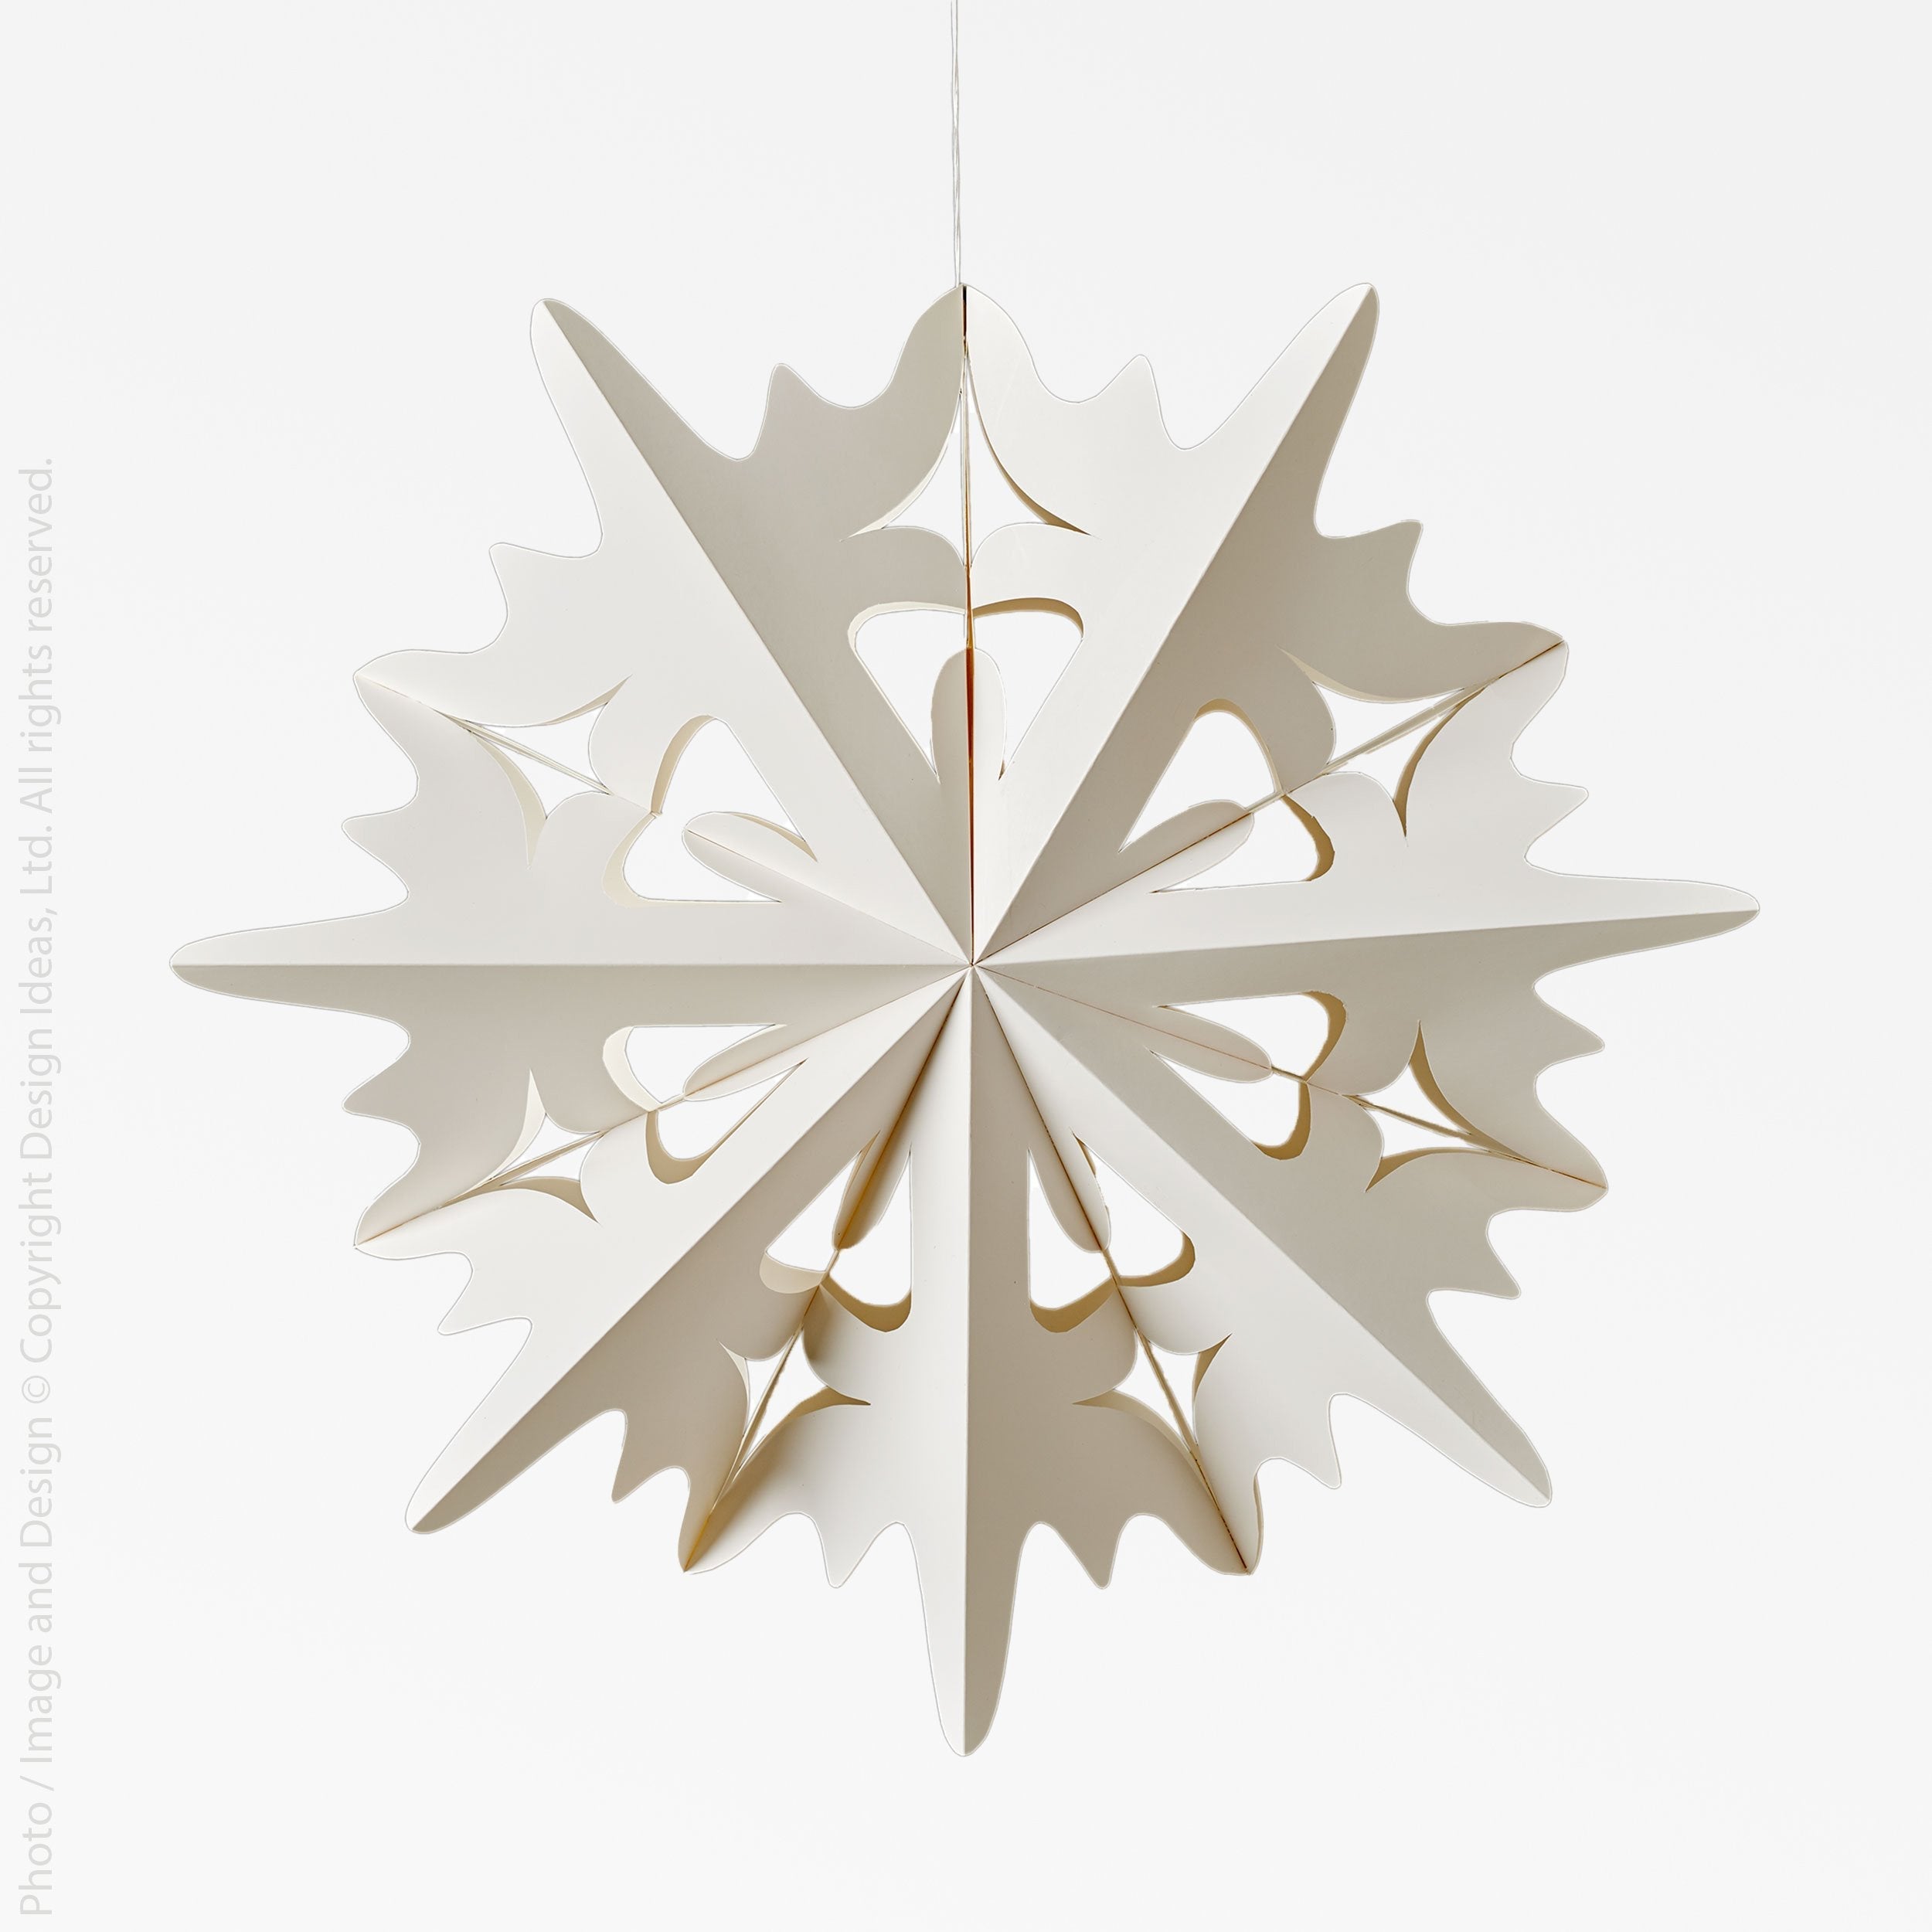 Flurry Paper Snowflake Crystal (Large) - Natural Color | Image 1 | From the Flurry Collection | Exquisitely made with natural paper for long lasting use | Available in white color | texxture home